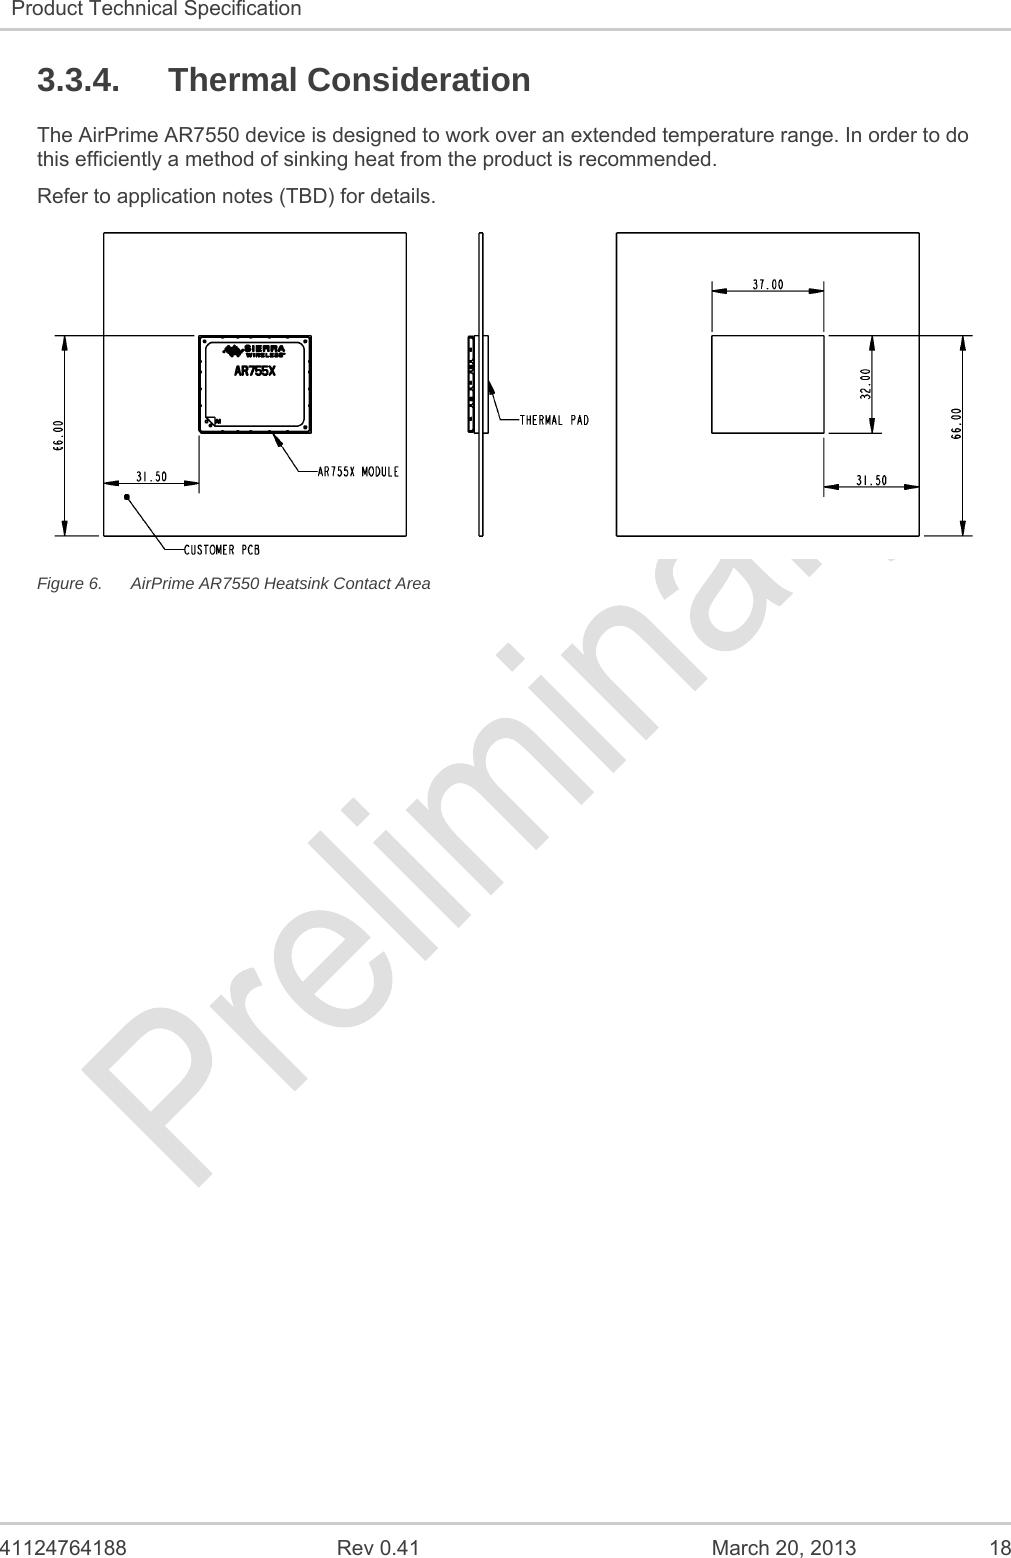   41124764188  Rev 0.41  March 20, 2013  18 Product Technical Specification   3.3.4. Thermal Consideration The AirPrime AR7550 device is designed to work over an extended temperature range. In order to do this efficiently a method of sinking heat from the product is recommended. Refer to application notes (TBD) for details.  Figure 6.  AirPrime AR7550 Heatsink Contact Area 